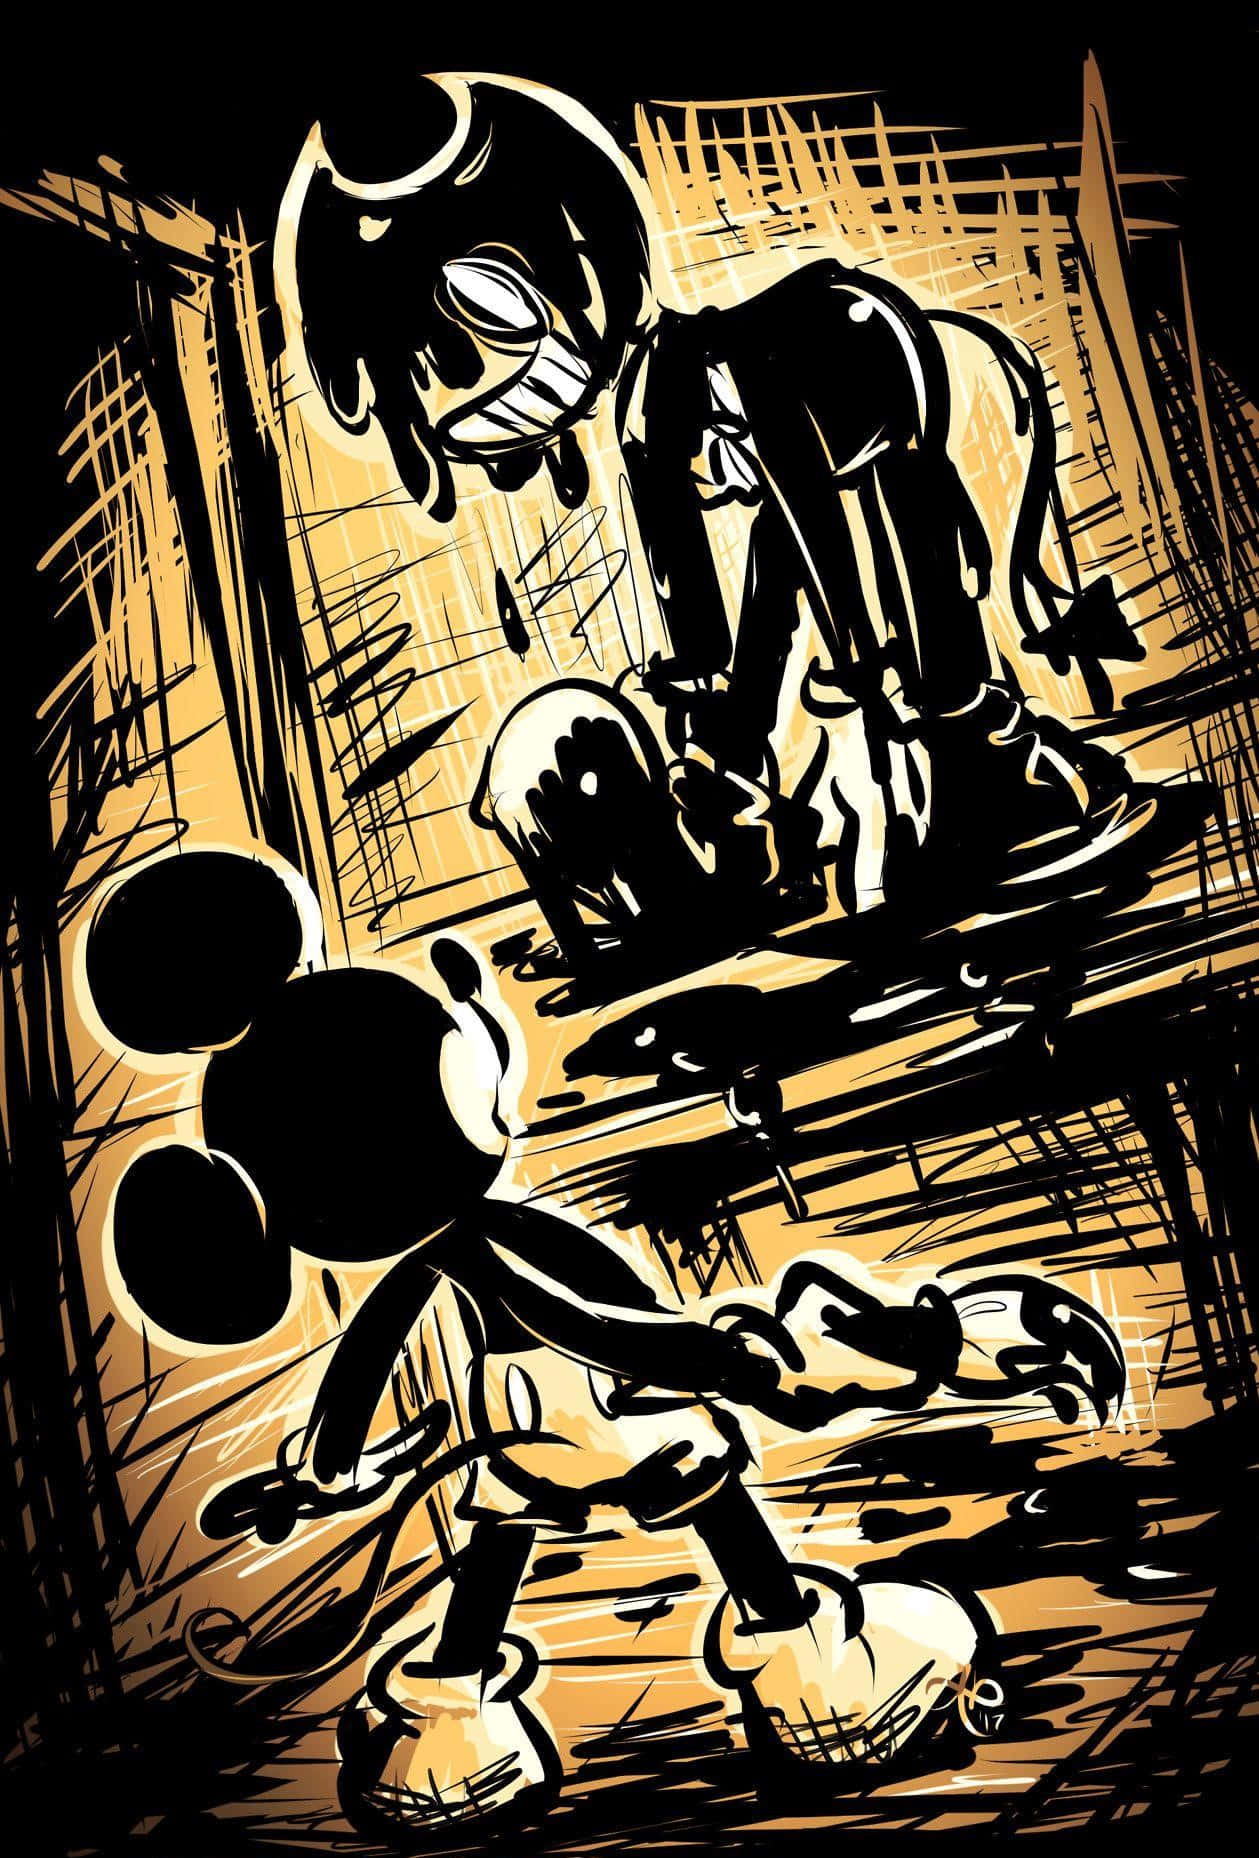 Bendy The Ink Demon Strikes A Pose Against A Retro-styled Ink Factory Background. Background